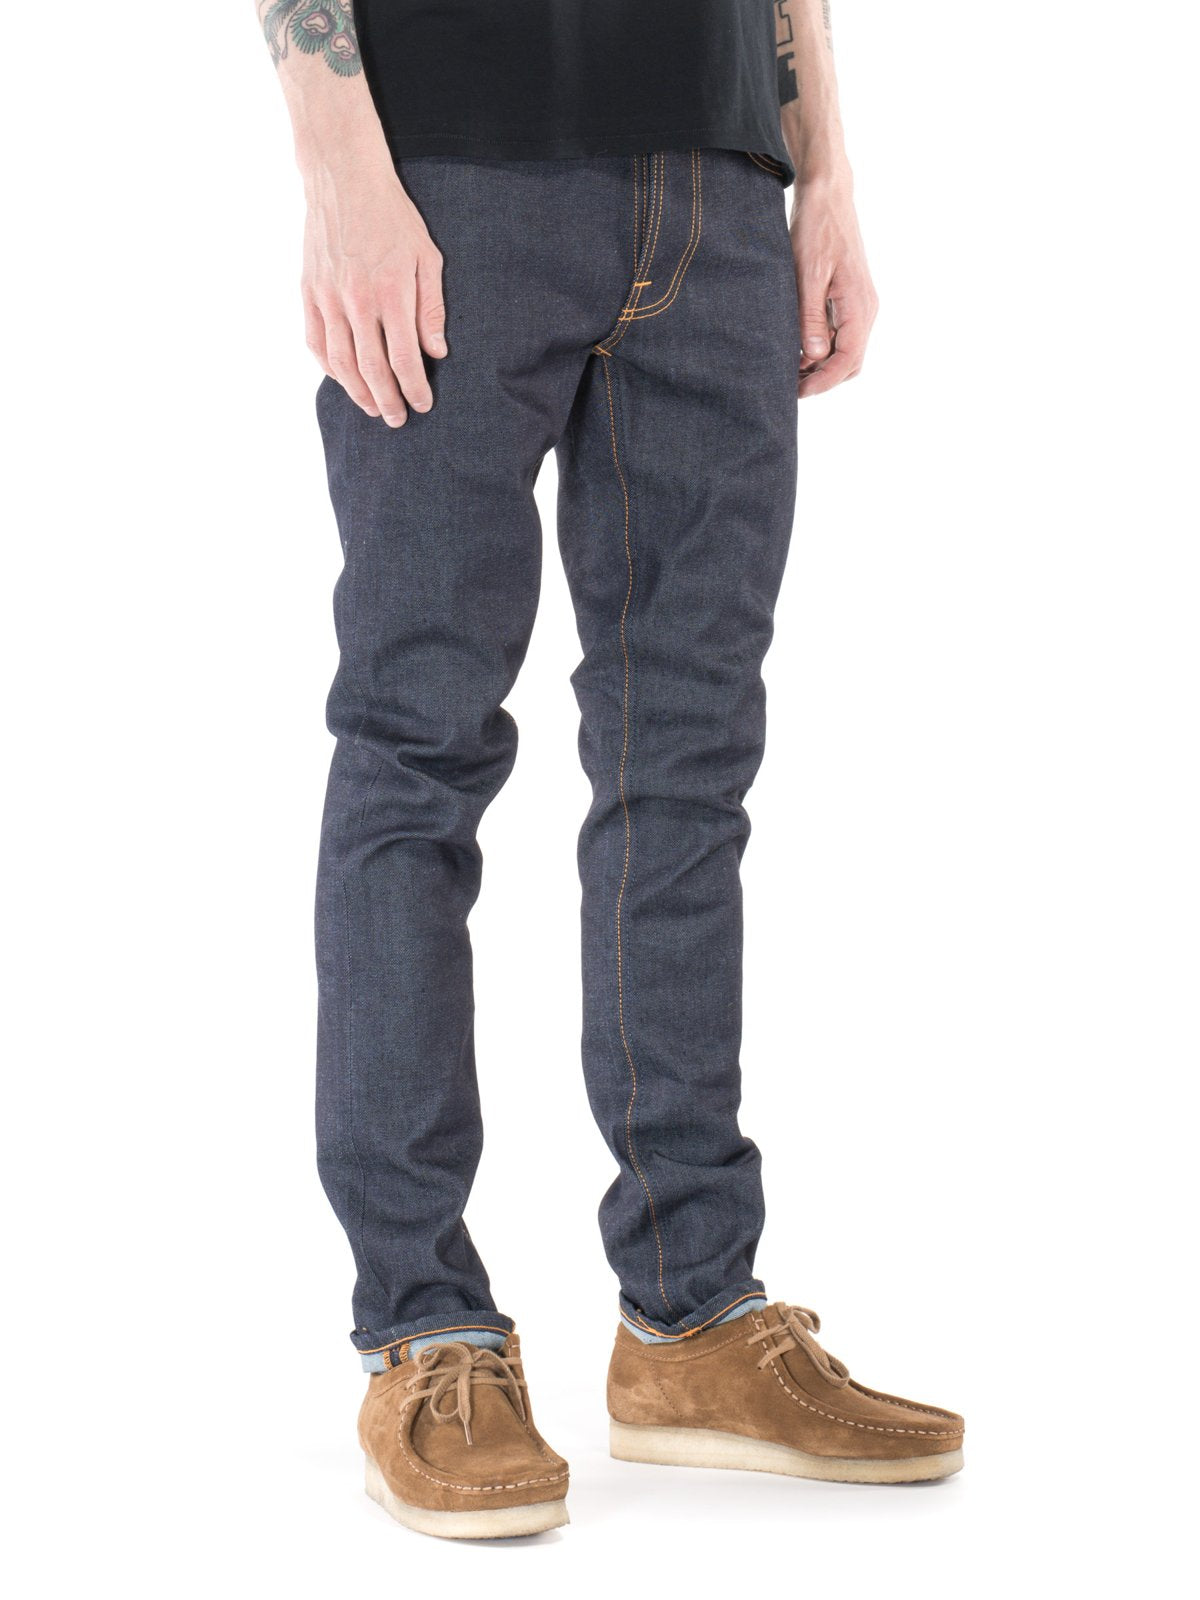 Nudie Jeans Lean Dean: Dry 16 Dips - The Union Project